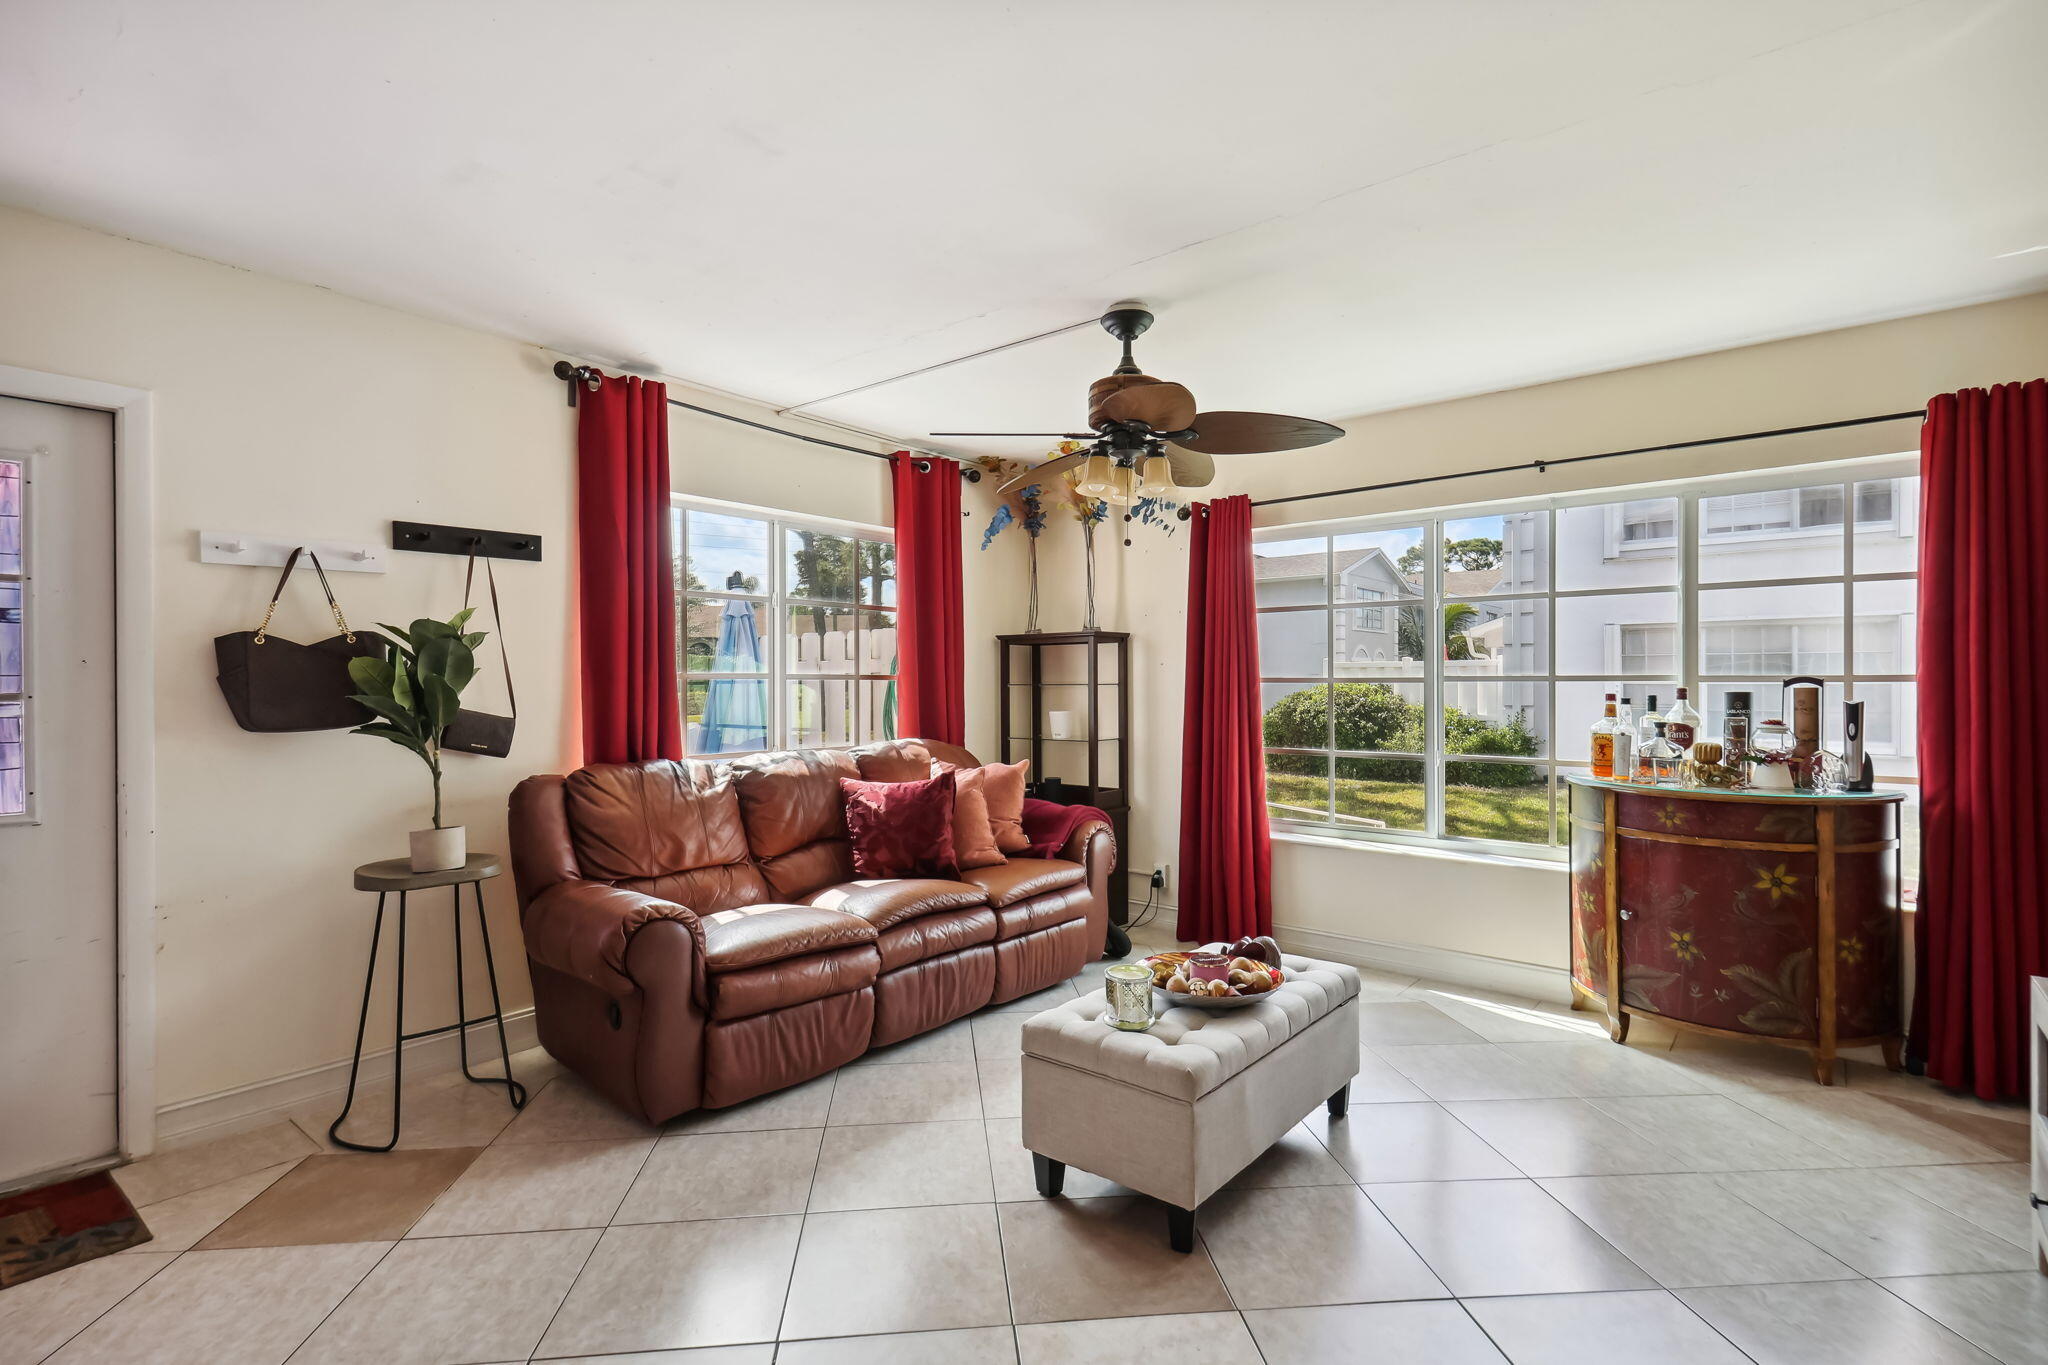 217 Foxtail Drive I, Greenacres, Palm Beach County, Florida - 2 Bedrooms  
1.5 Bathrooms - 